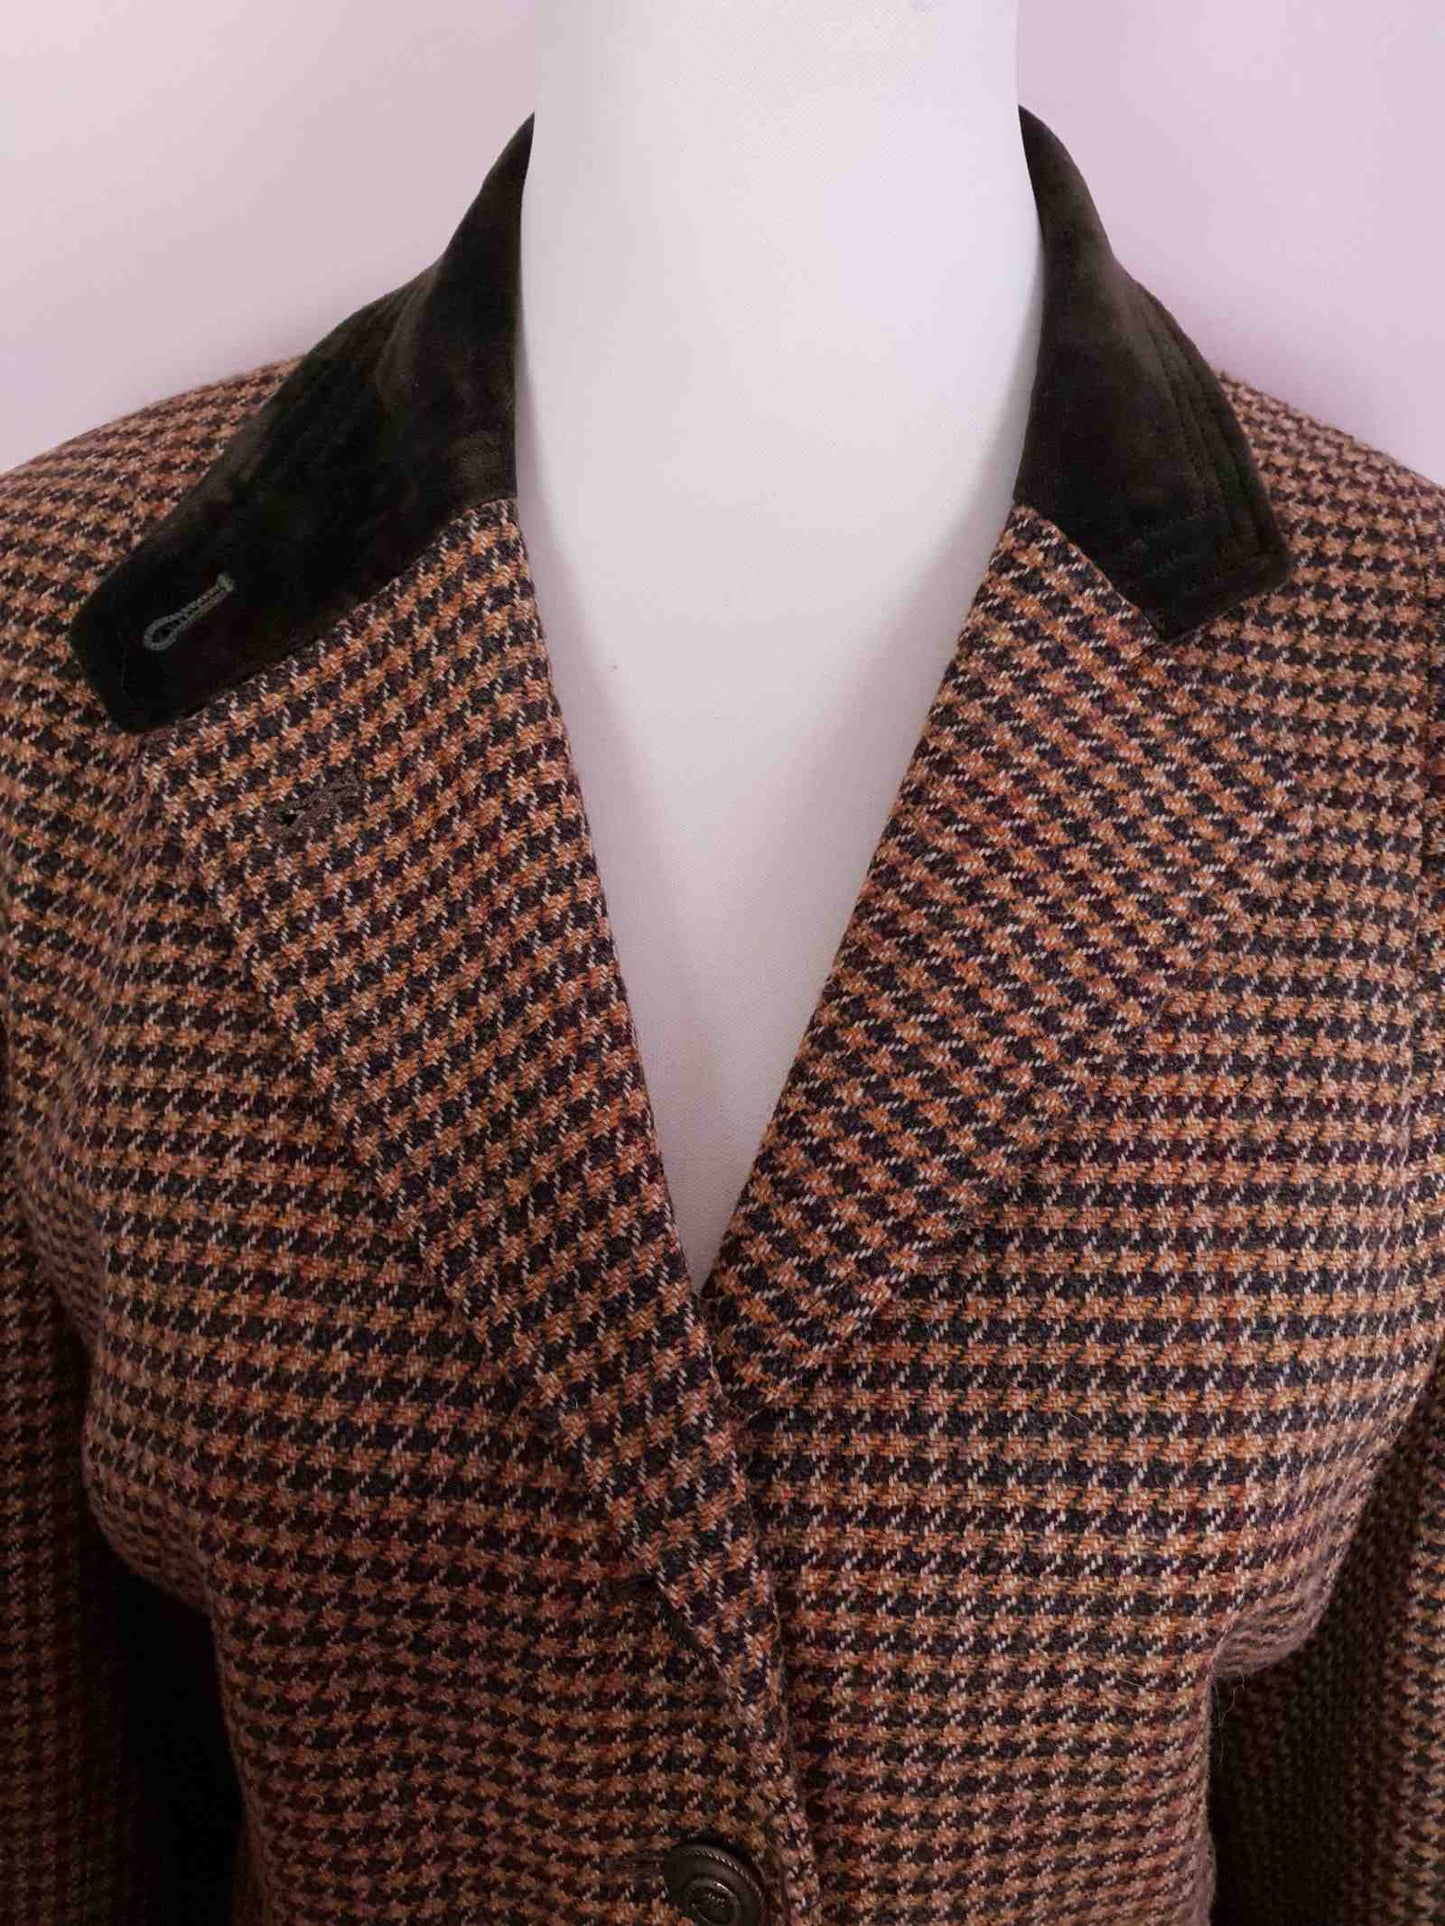 Vintage Mulberry Houndstooth Check Wool Jacket 1990s - Size 14